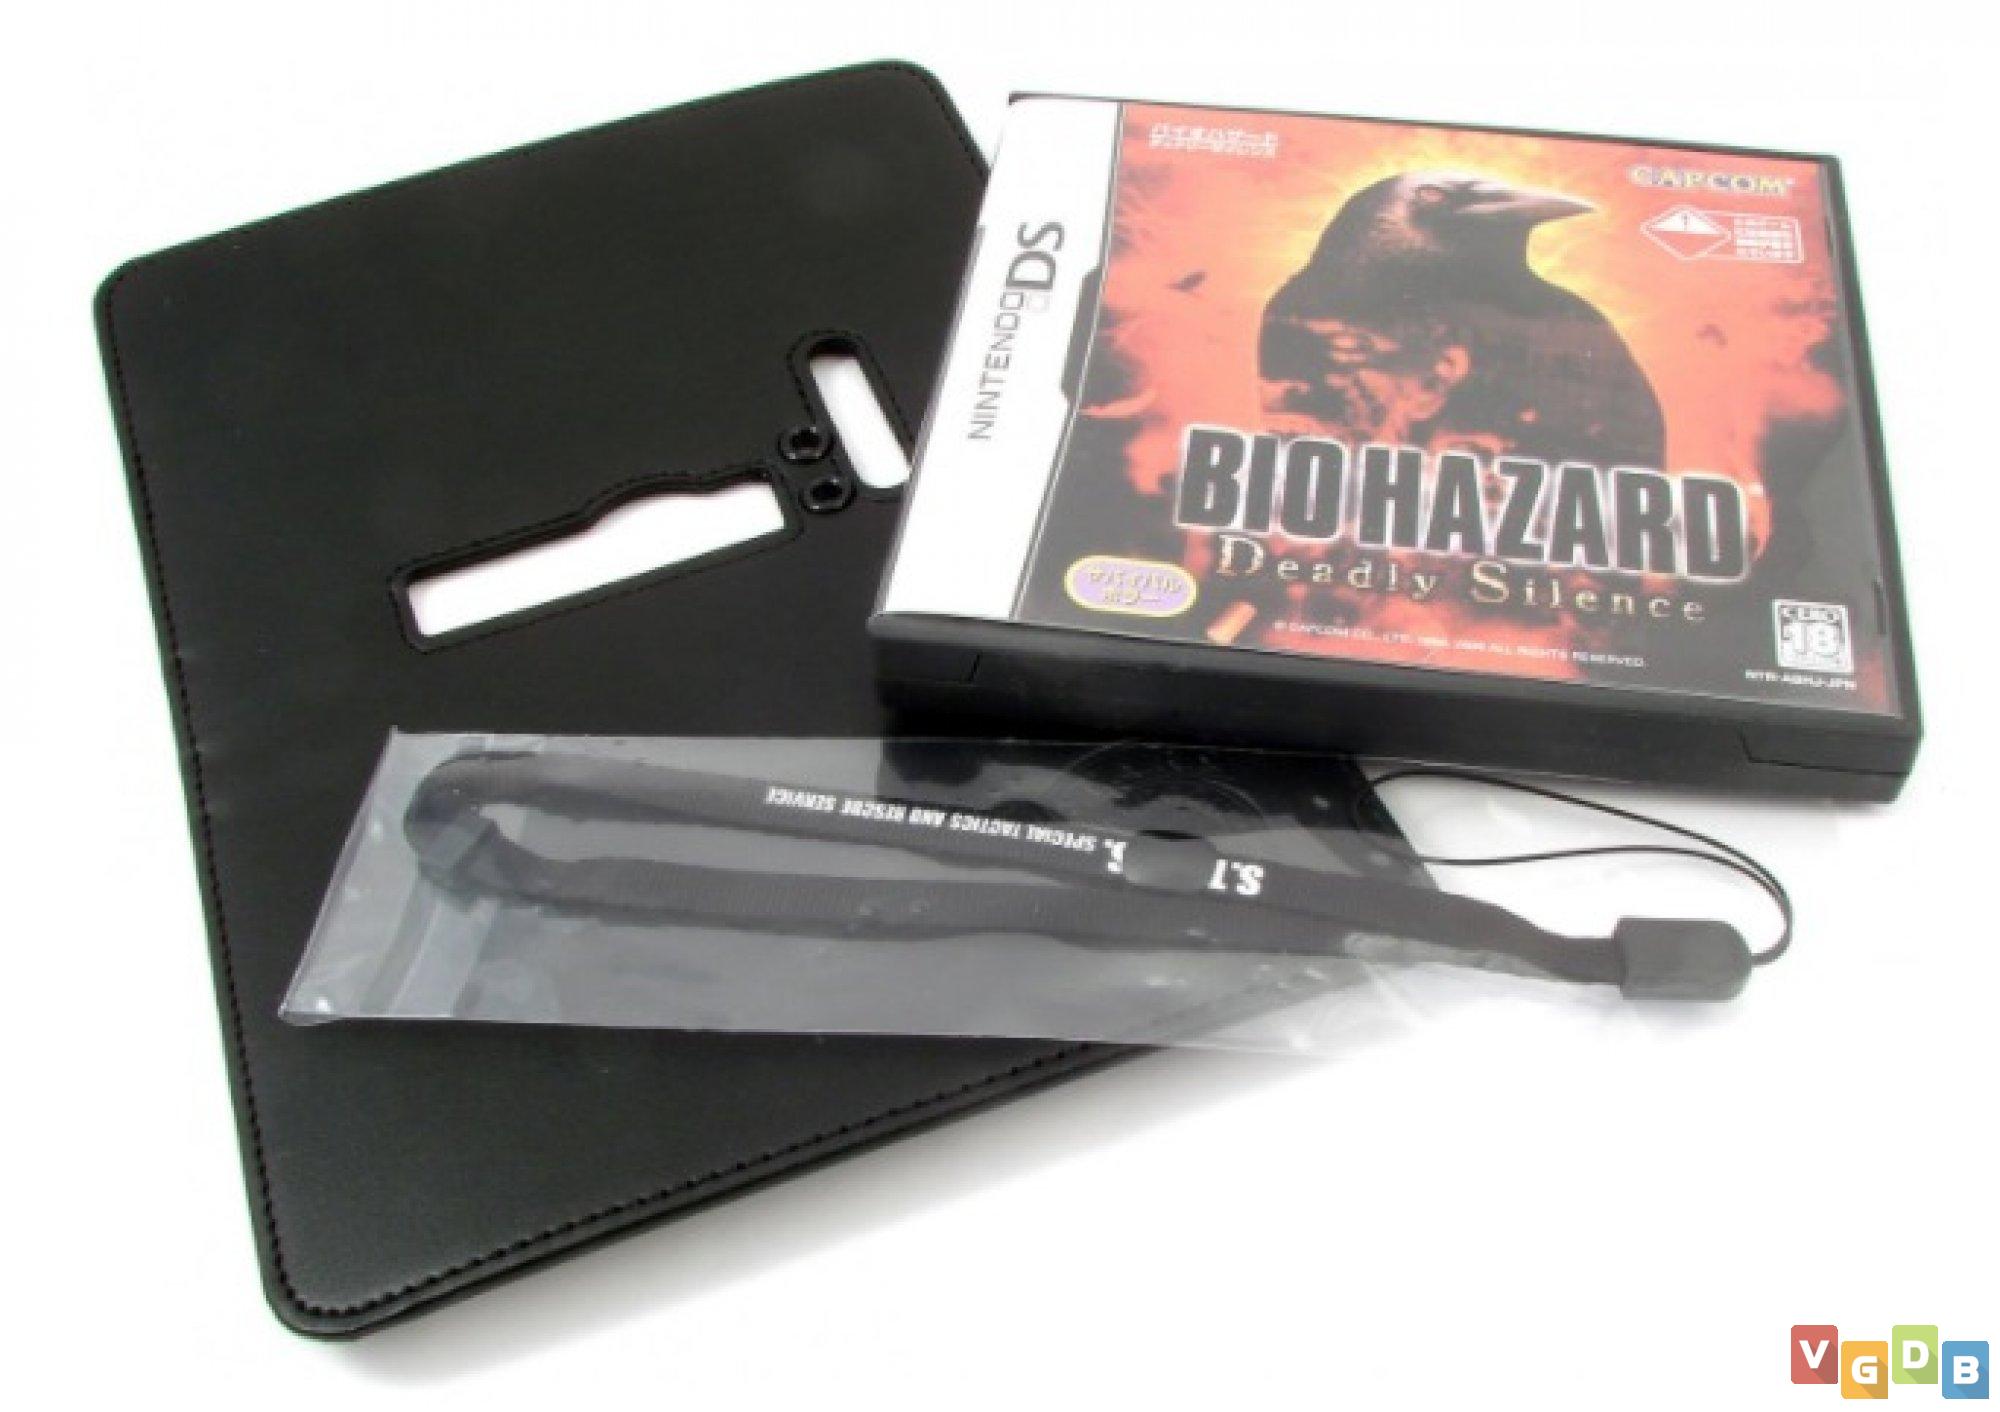 BioHazard: Deadly Silence - Limited Pack - VGDB - Vídeo Game Data Base